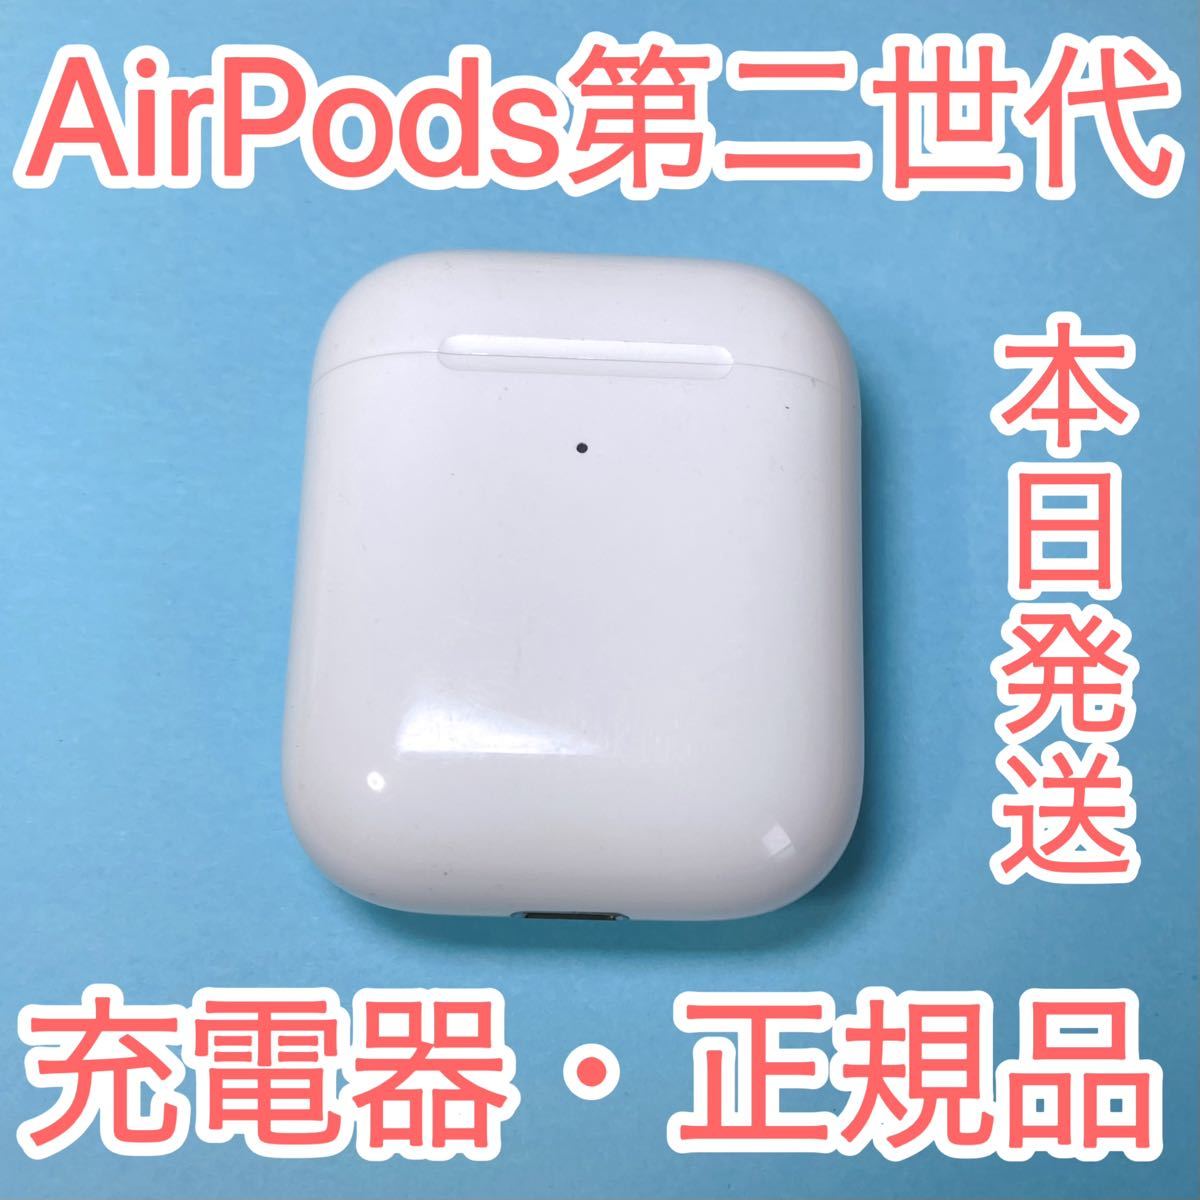 PayPayフリマ｜AirPods Pro 純正品 充電器 充電ケース ワイヤレス充電器